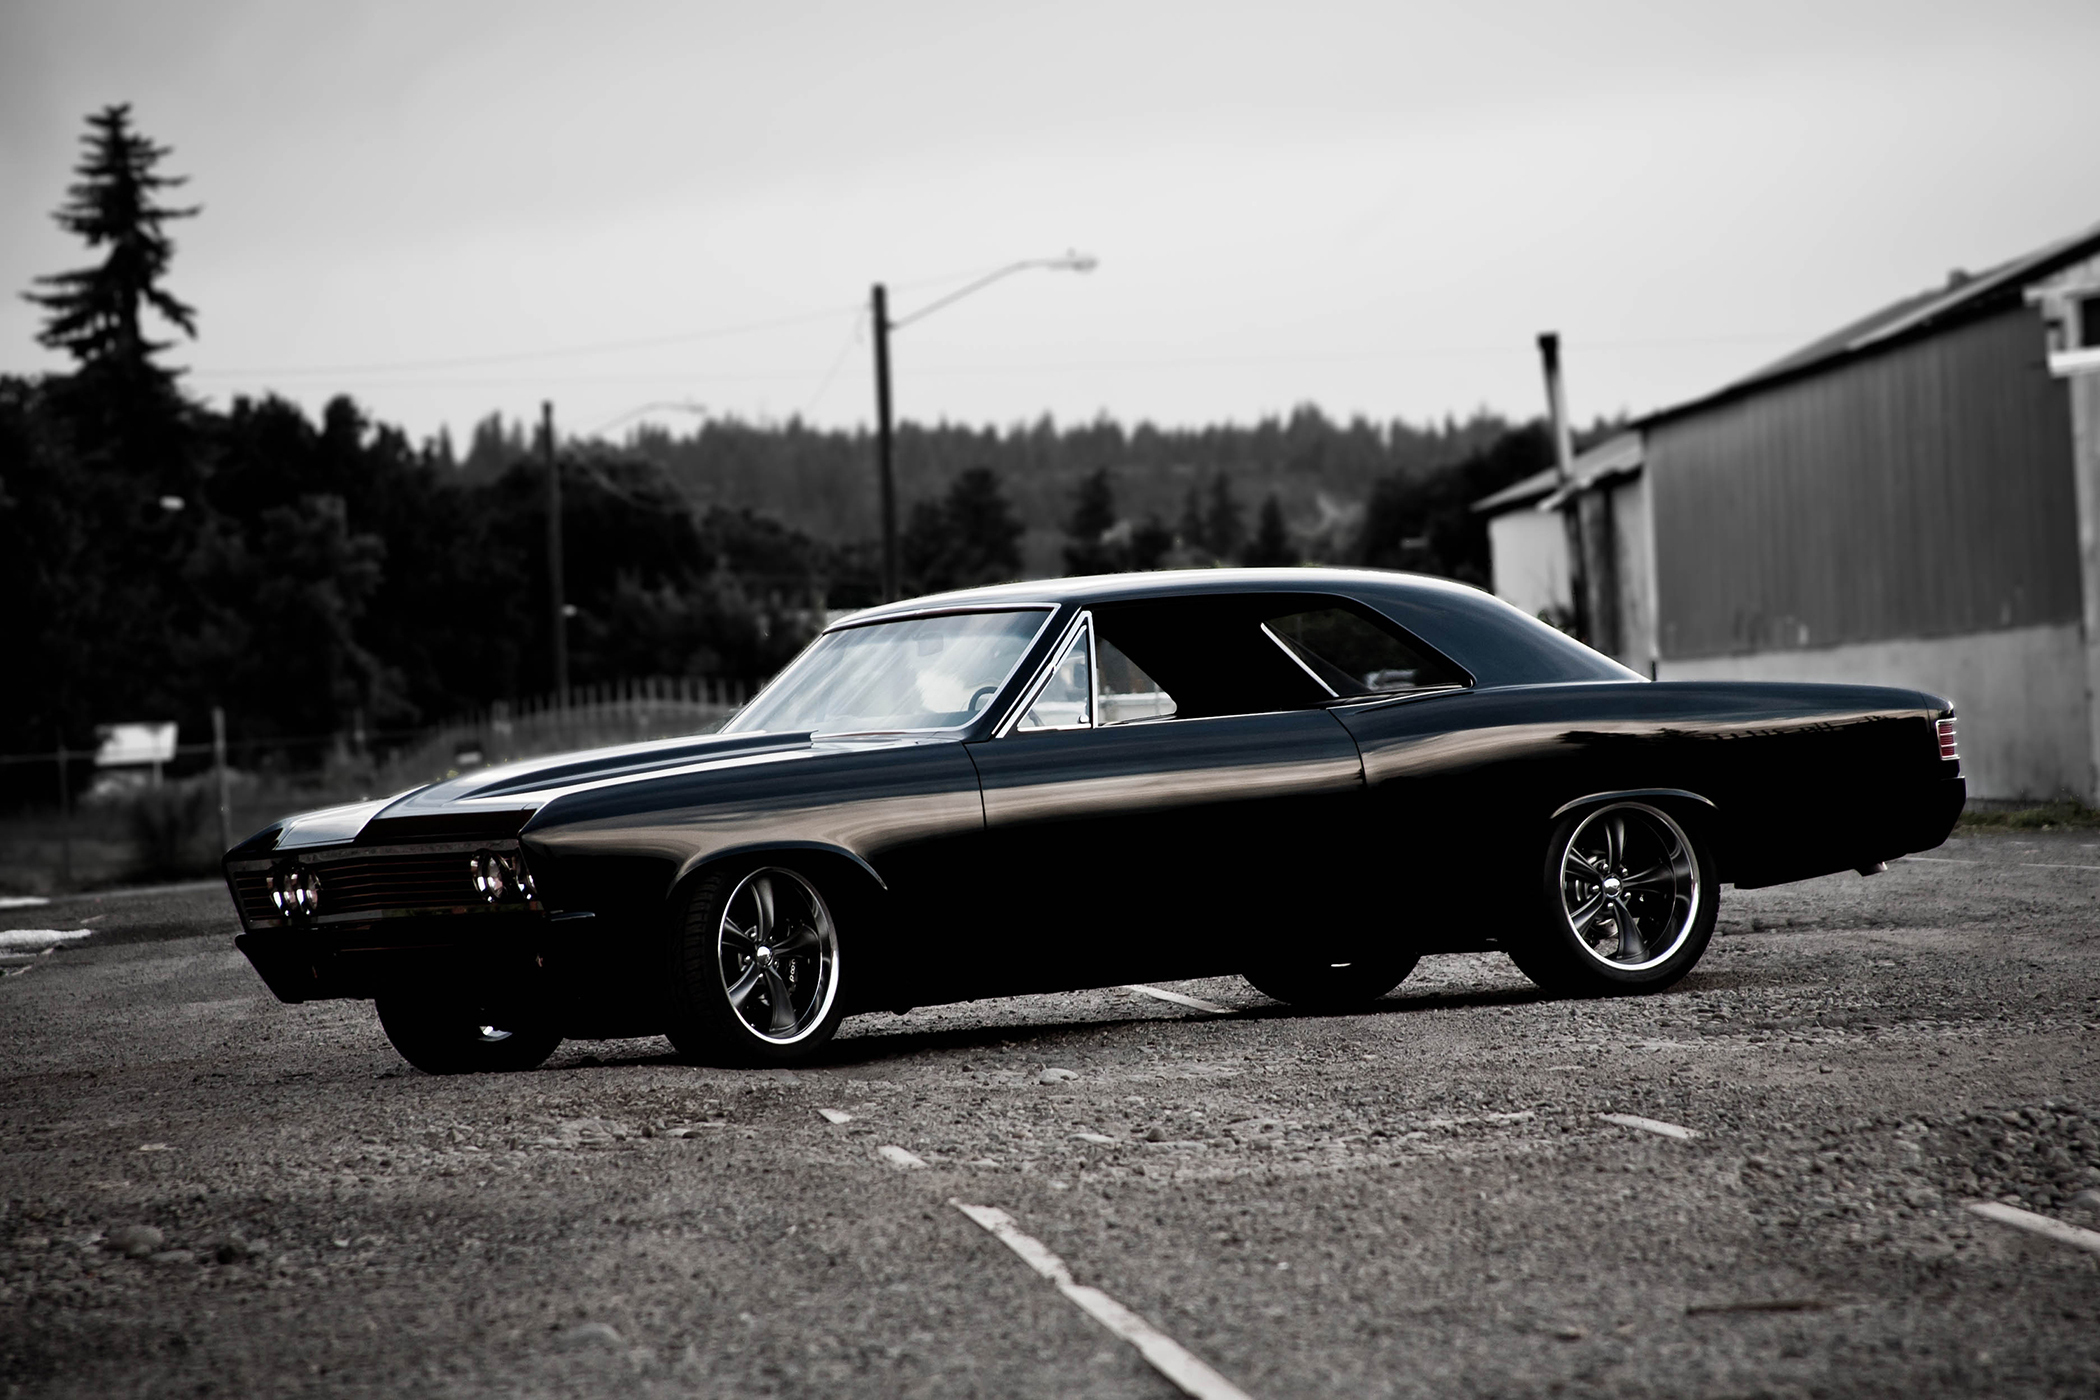  1967 chevy hot rod muscle car classic car custom wallpaper background